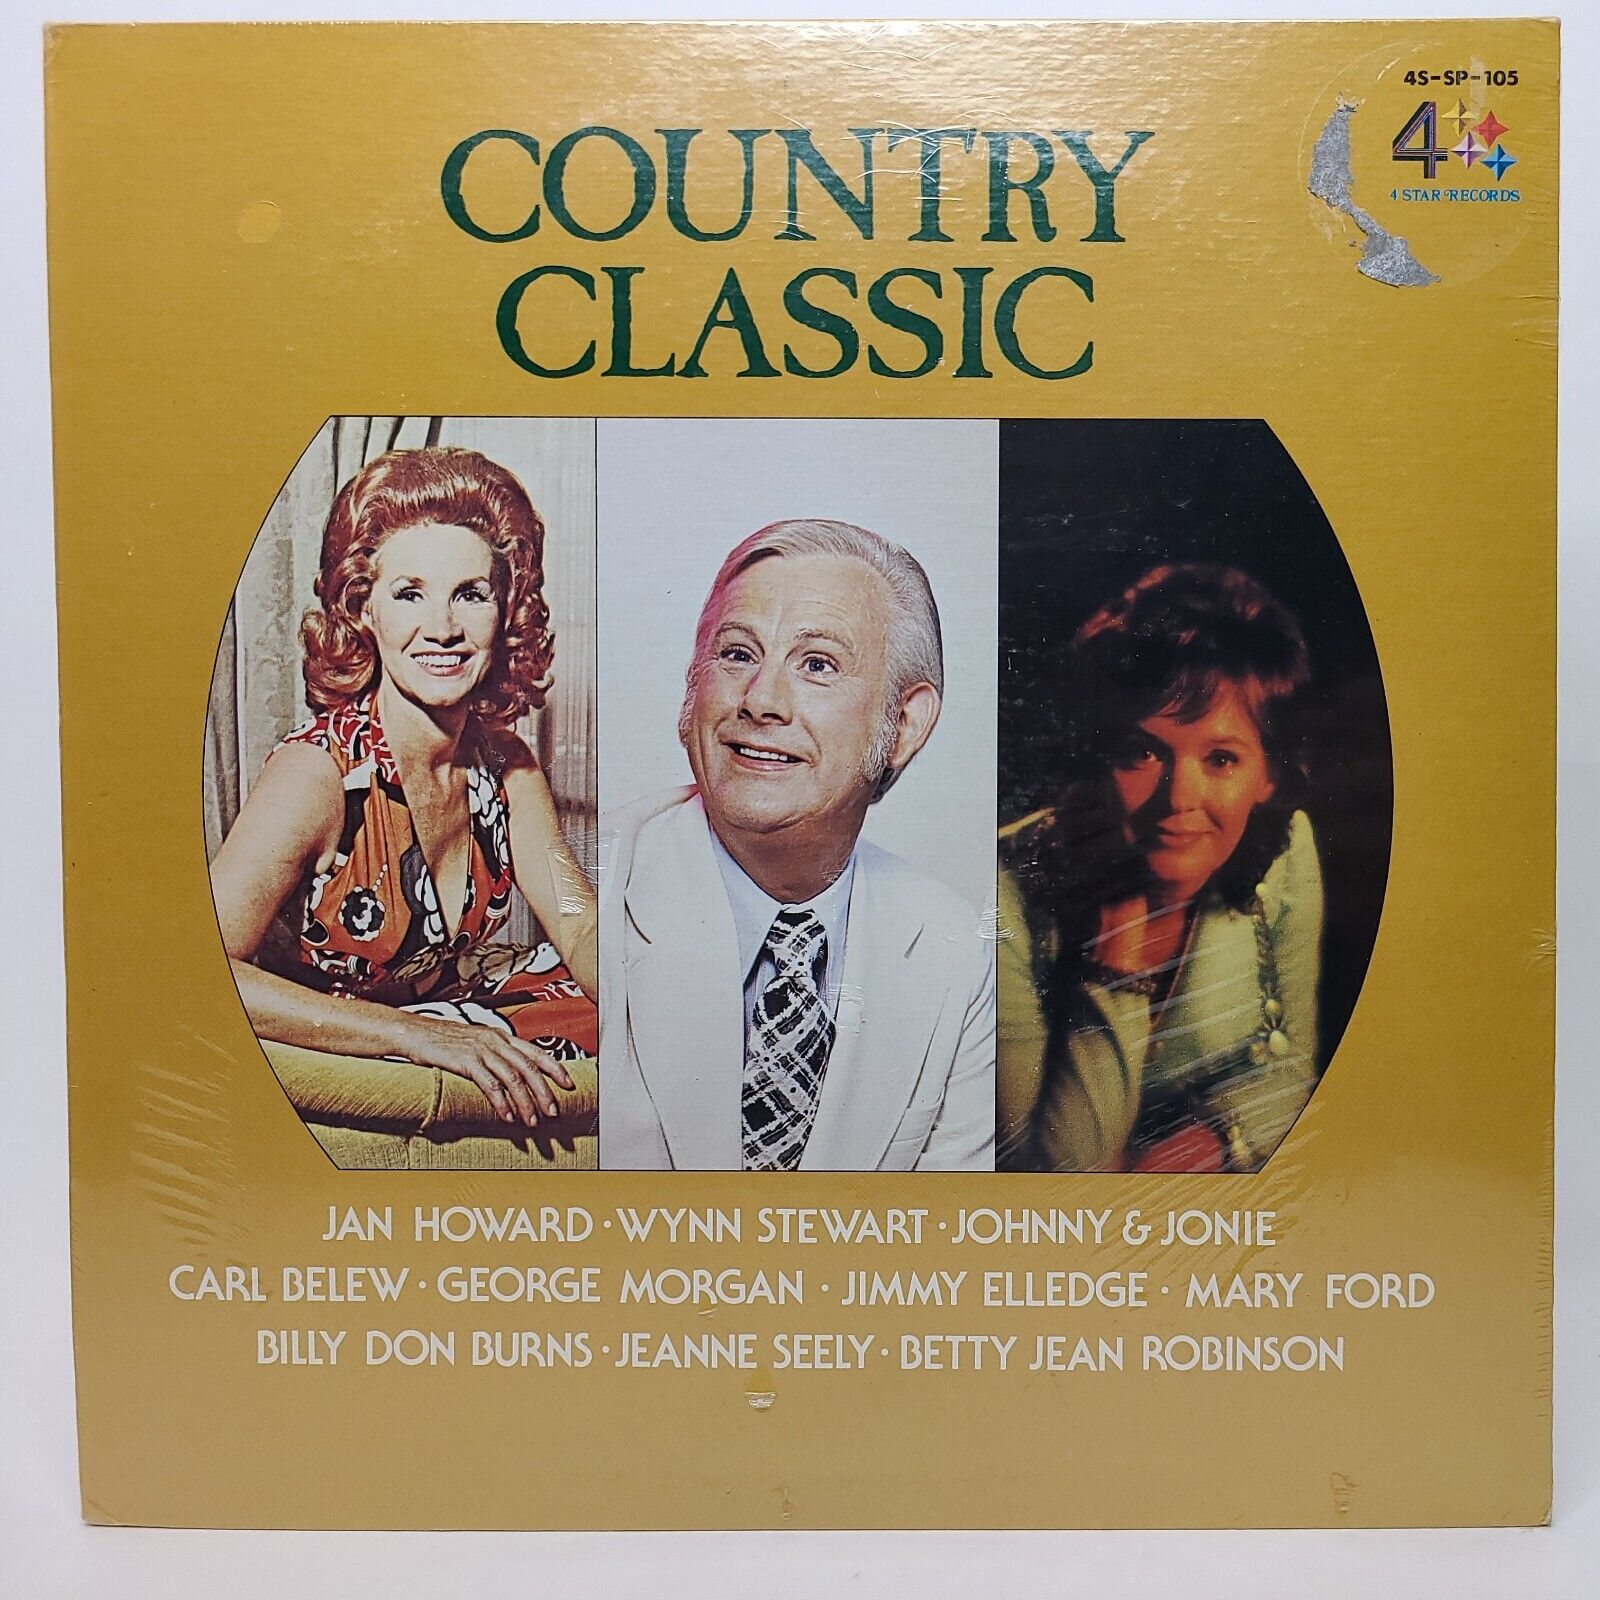 Country Classic Vinyl LP 1977 Various Artists 4 Star Records 4S-SP-105 SEALED